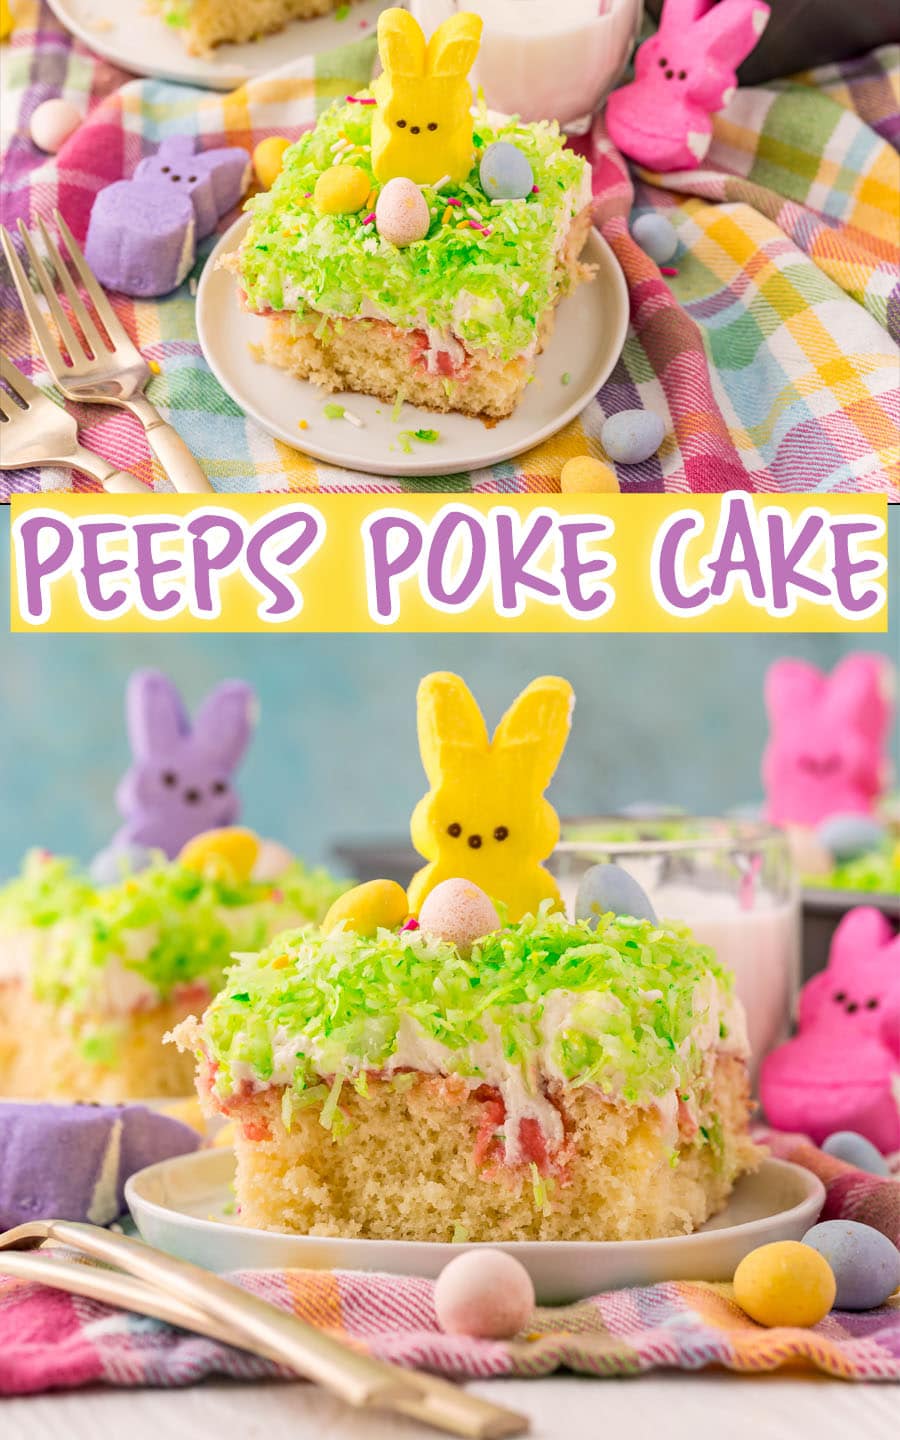 This Peeps Cake is a deliciously moist poke cake recipe full of flavor. Perfect for Easter, this is a dessert that everyone loves. #easter #peeps #cake #dessert #pokecake #dessert